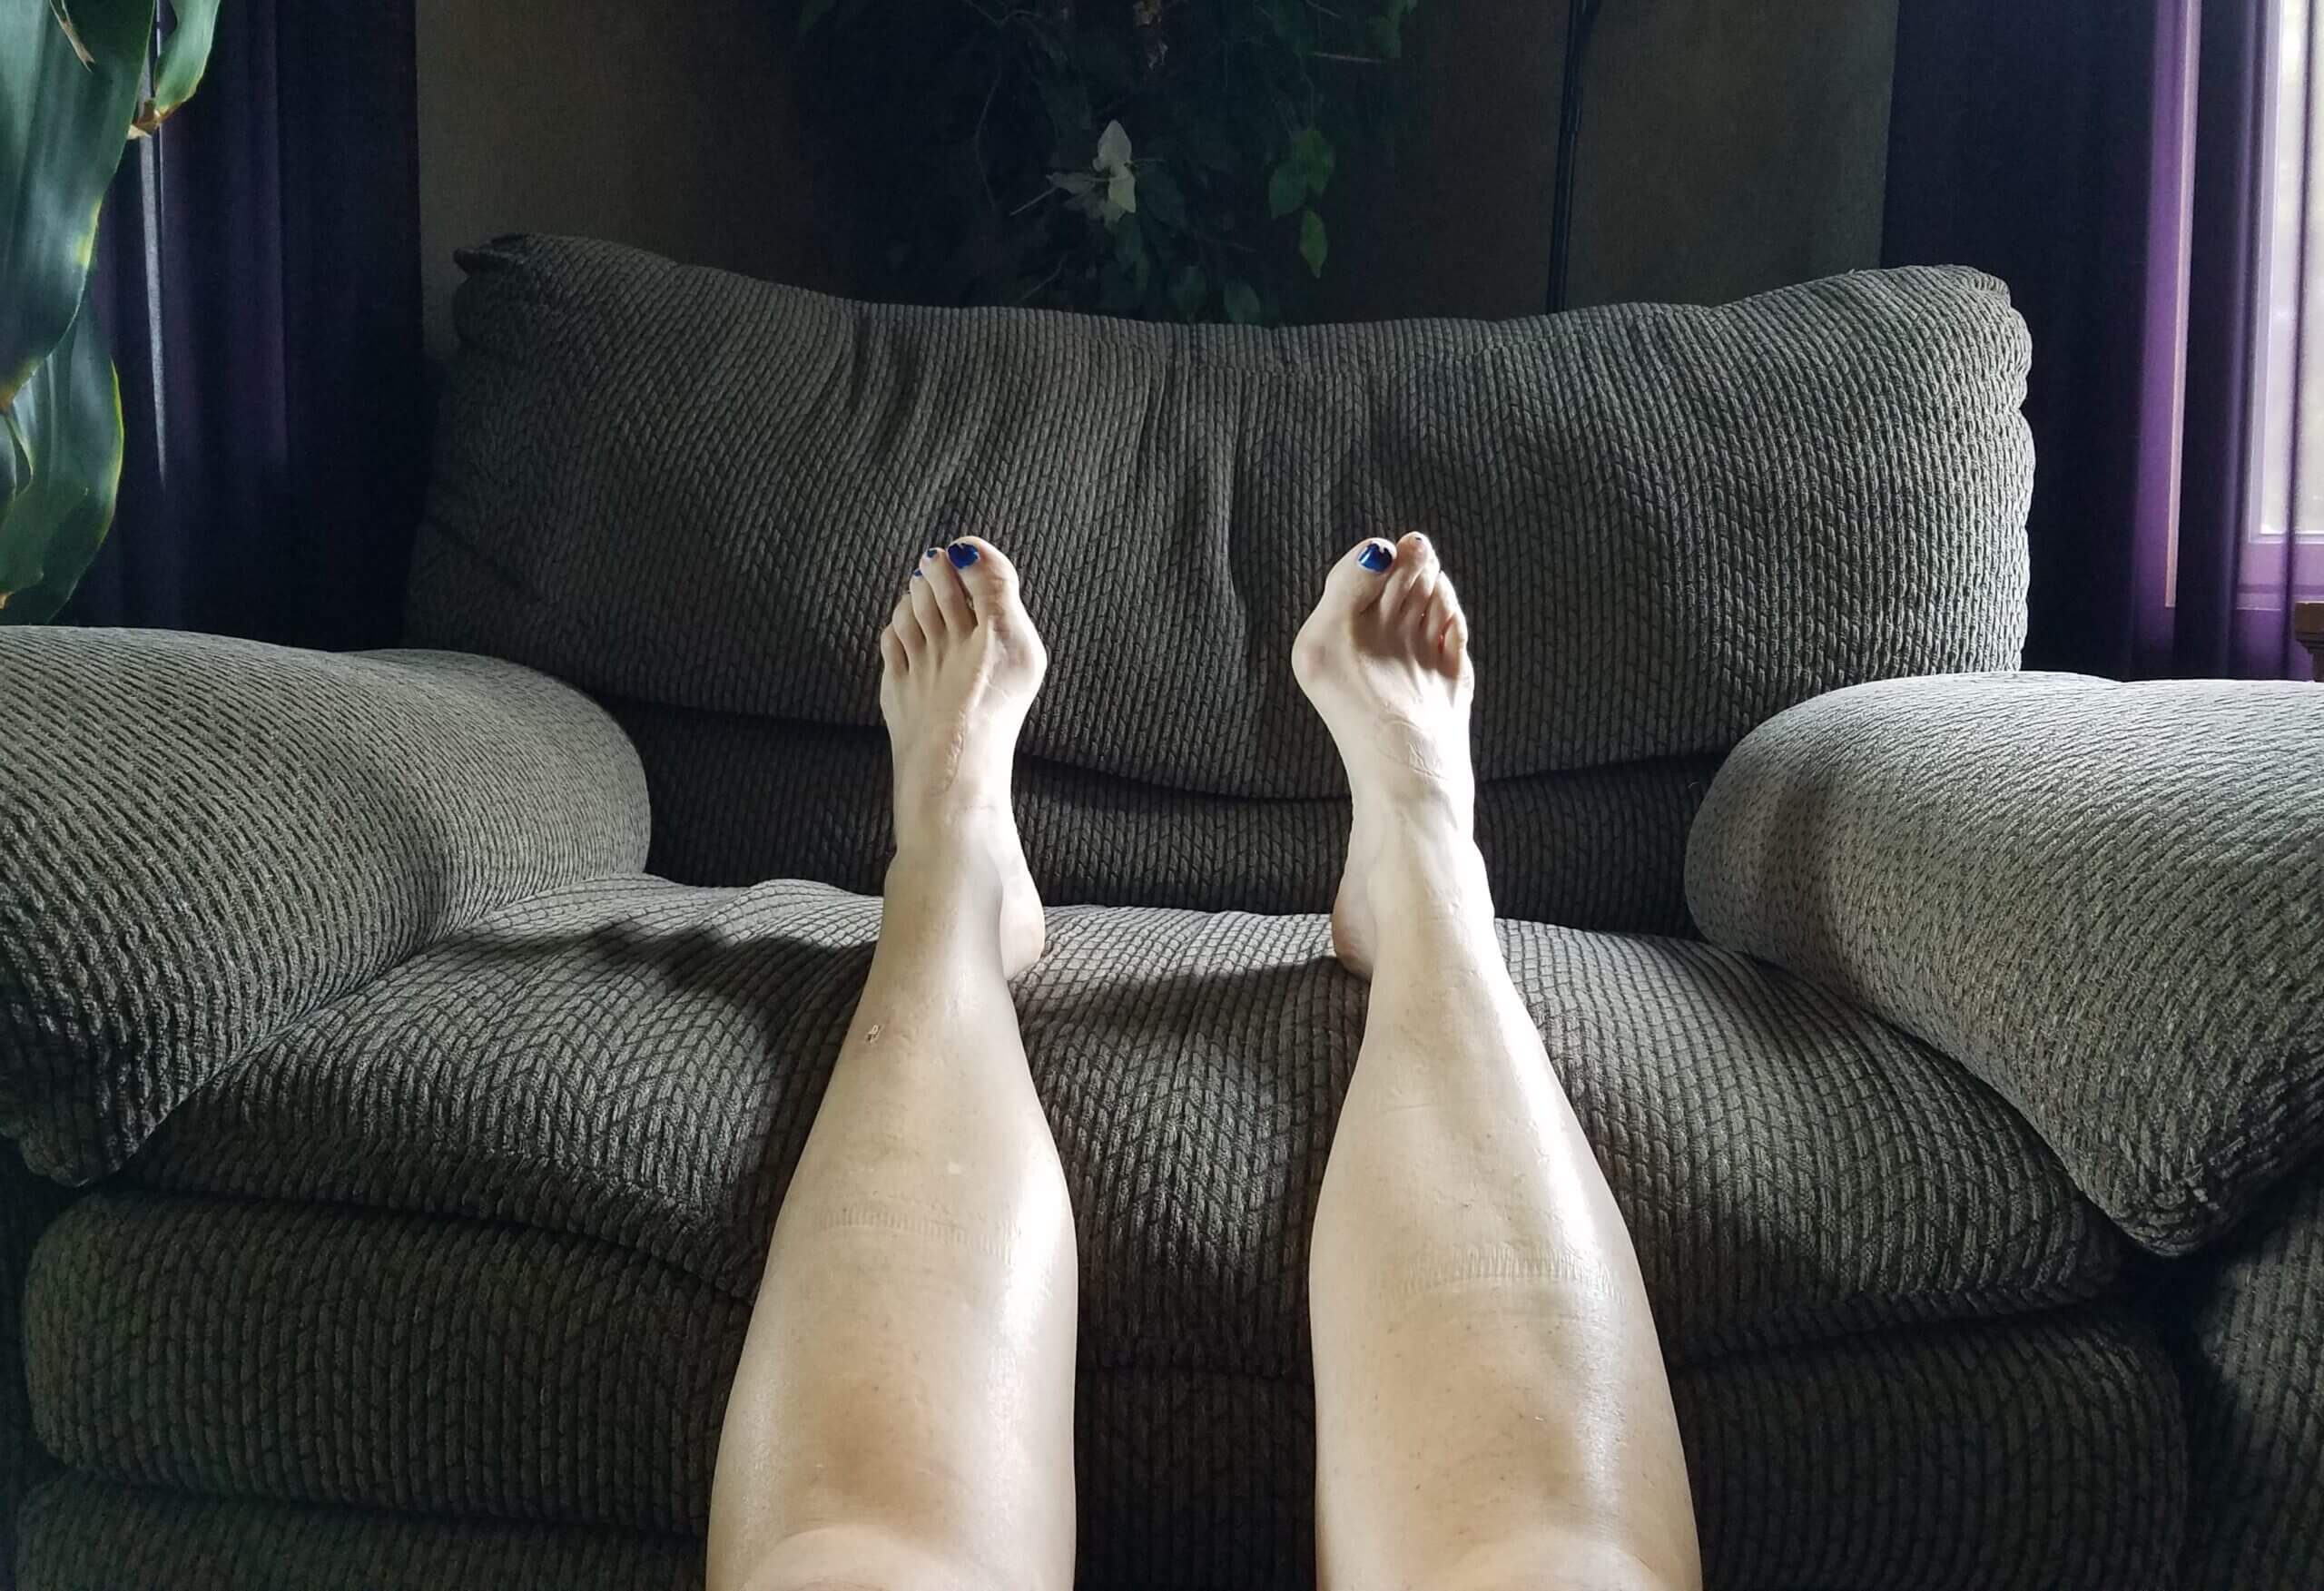 Feet up on a chair